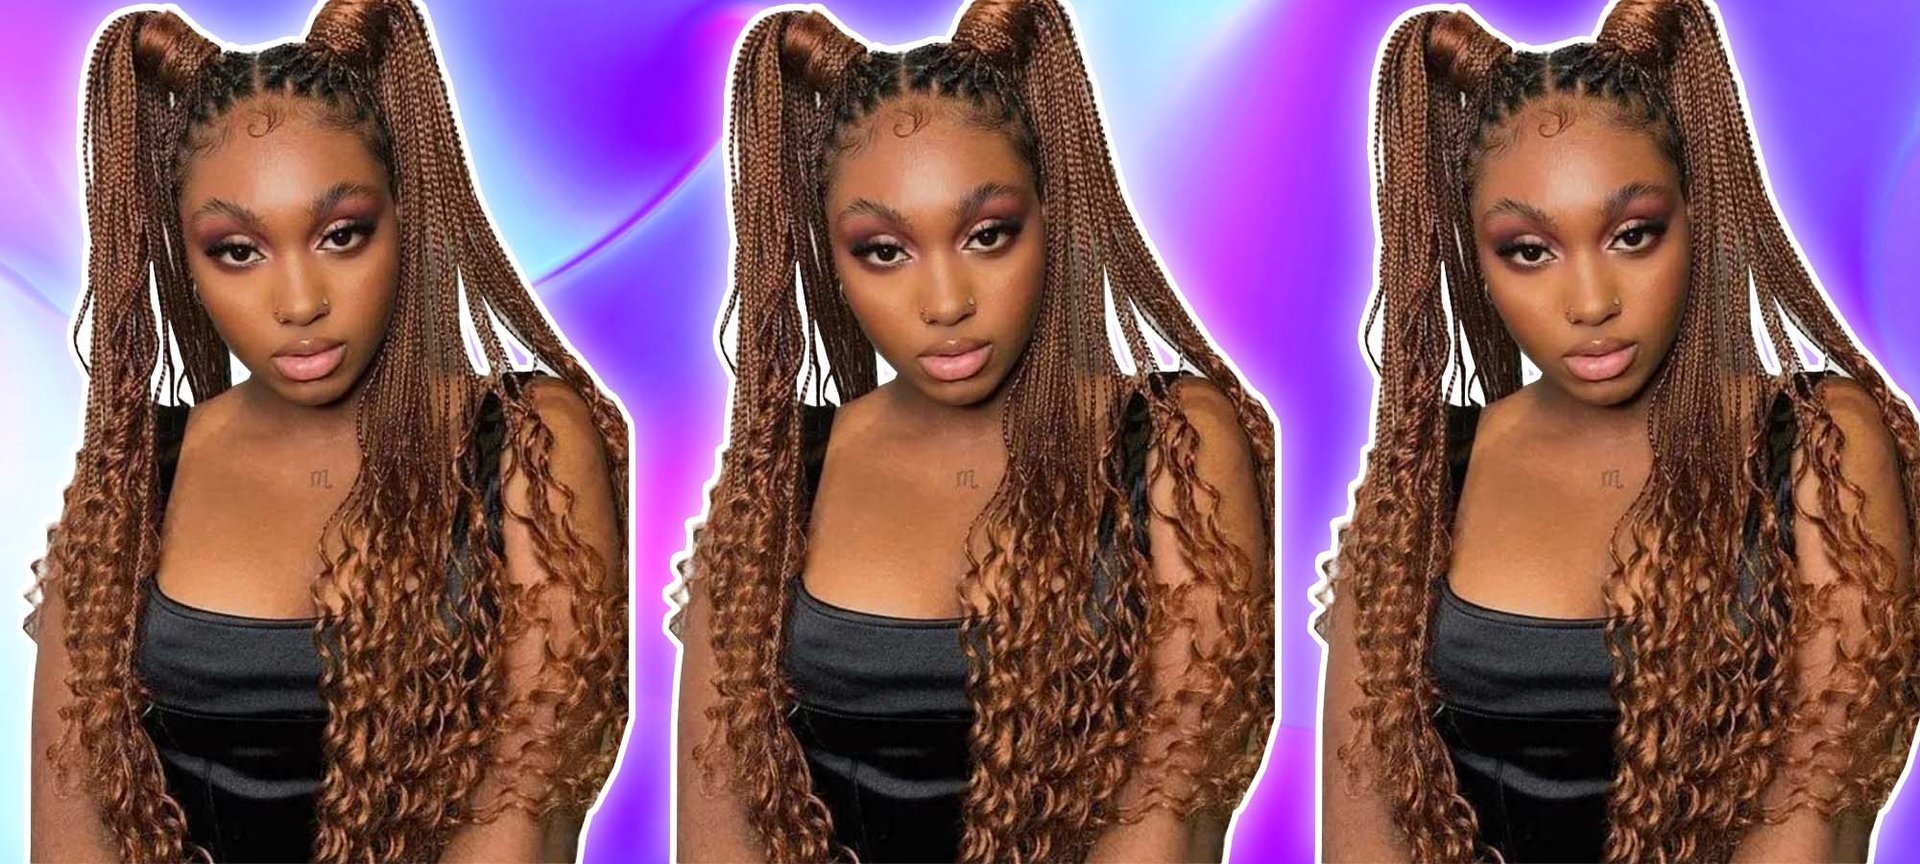 https://www.lorealparisusa.com/-/media/project/loreal/brand-sites/oap/americas/us/beauty-magazine/2022/october/10-14/box-braids-with-curly-ends/box-braids-with-curly-ends.jpg?rev=76ffd02891244d998caa1f0331134d13